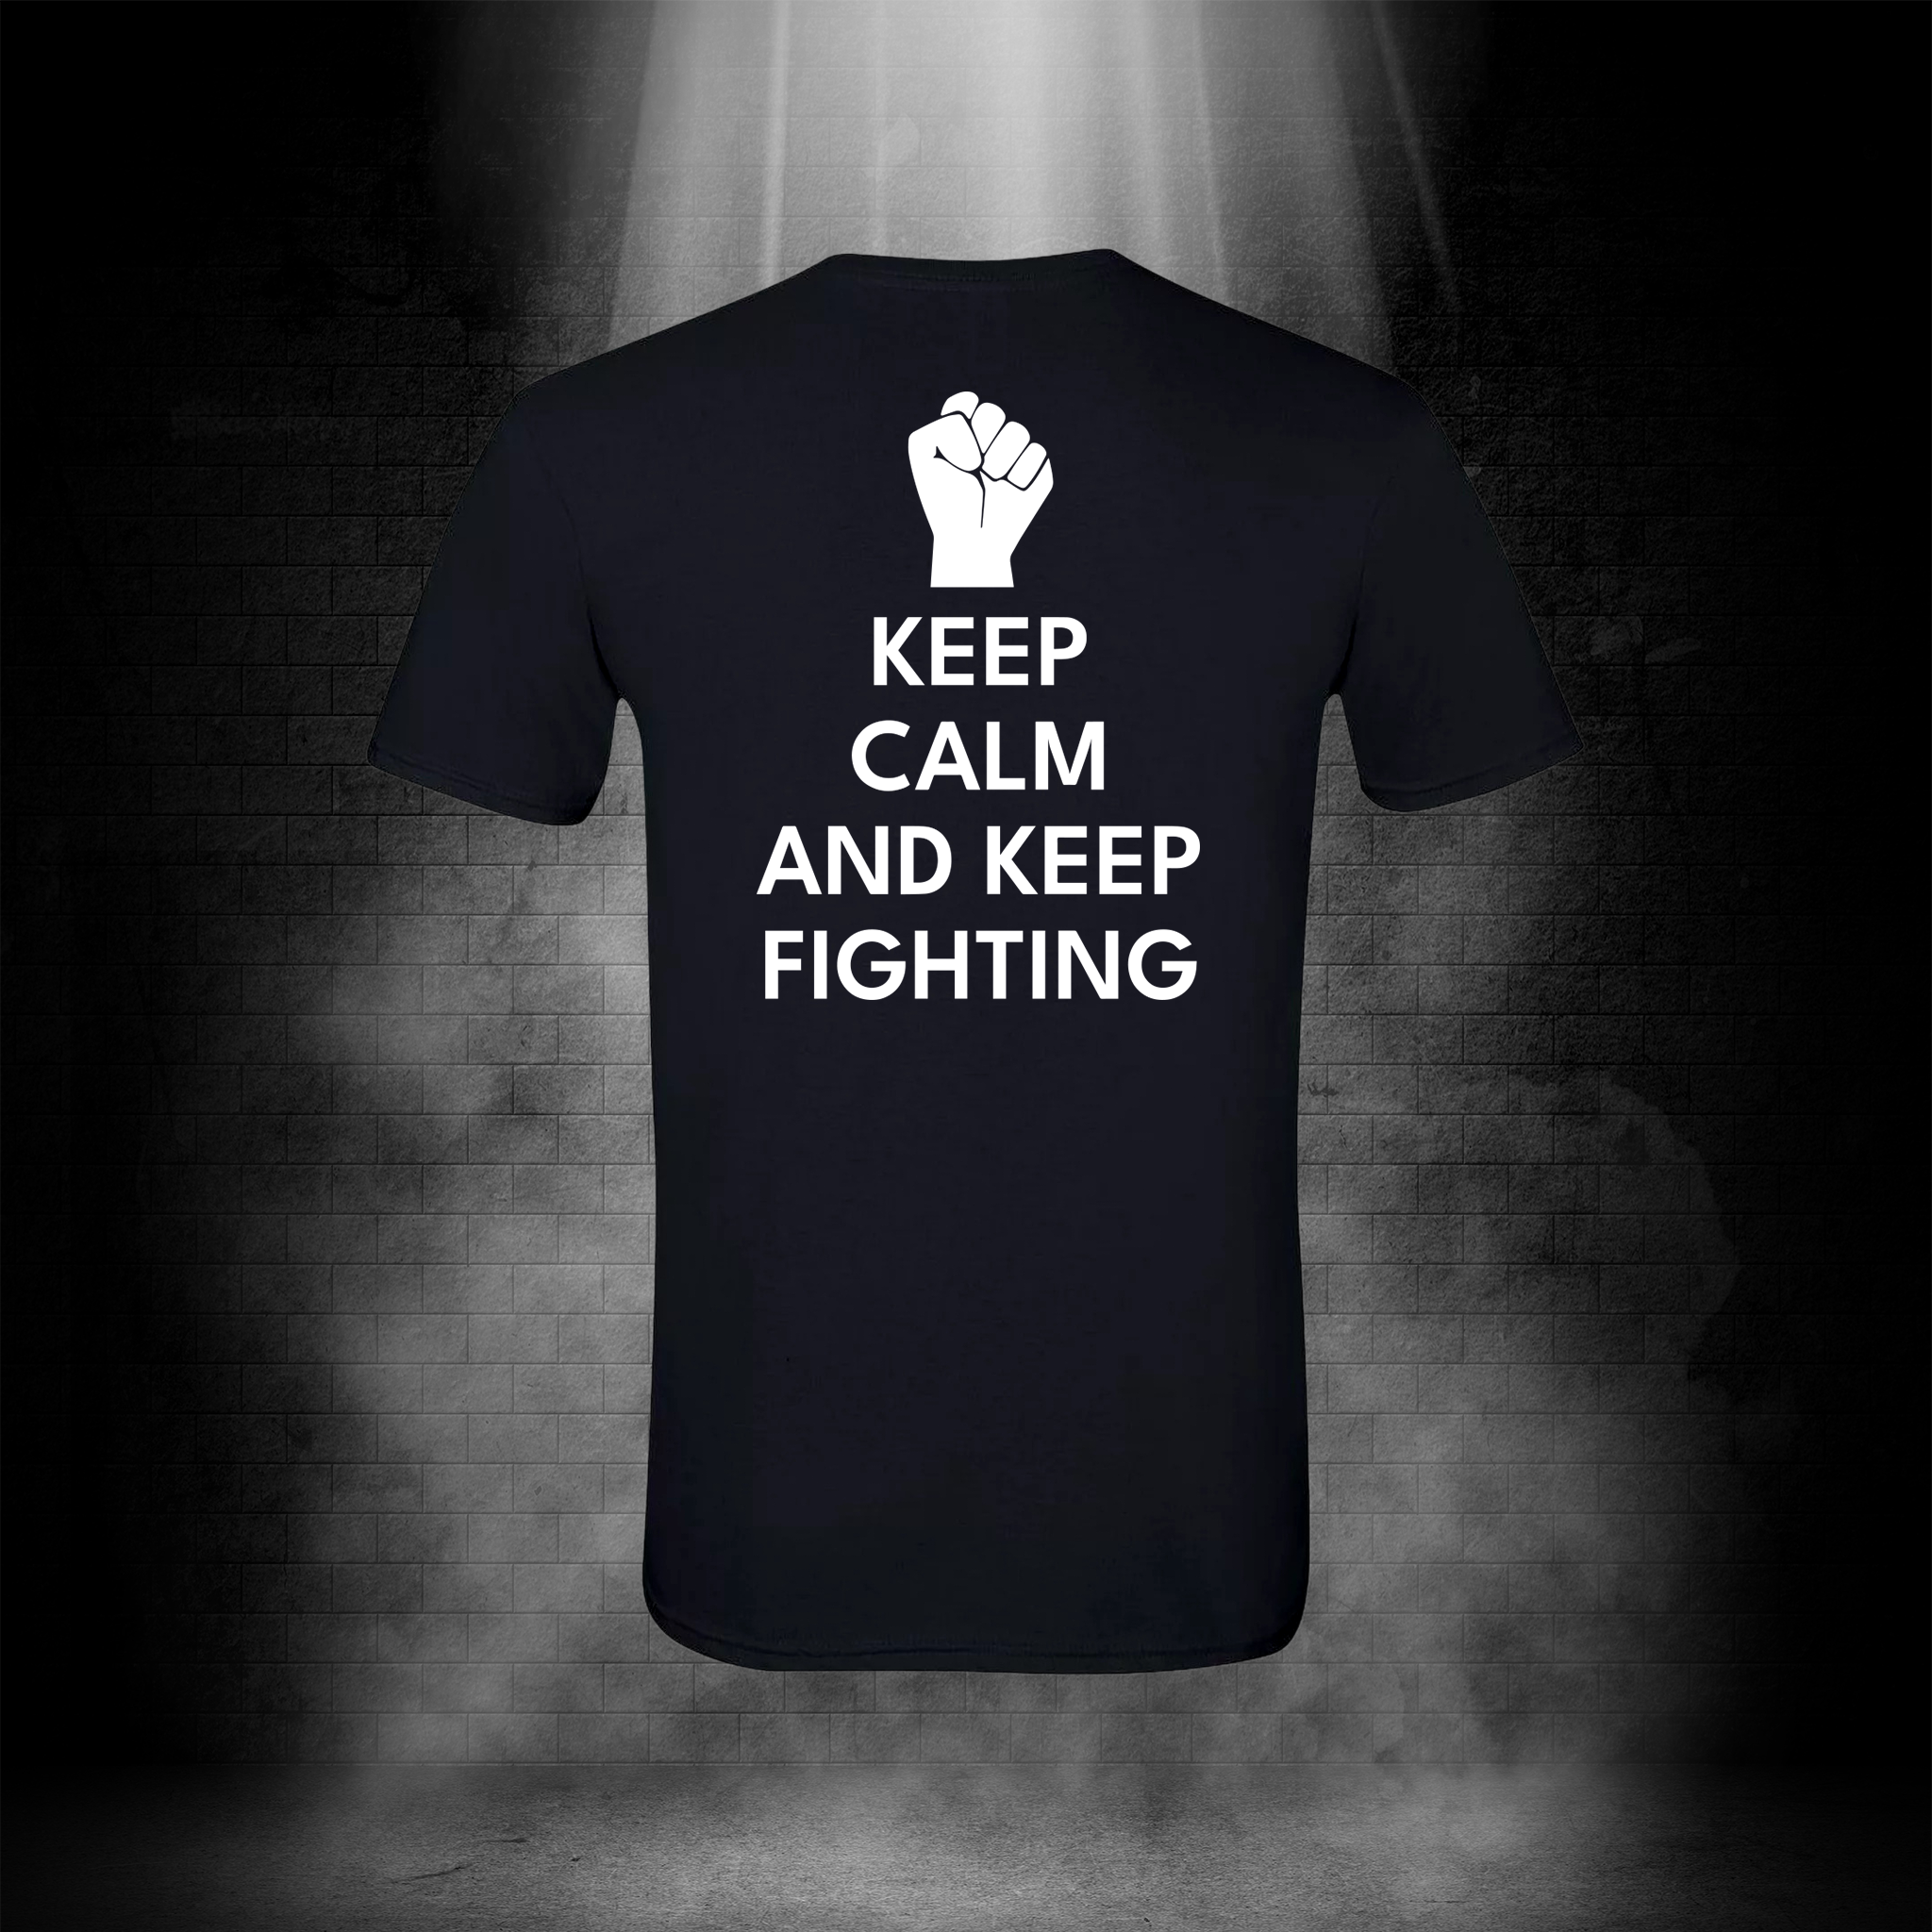 T-Shirt_Back-Keep Calm and Keep Fighting